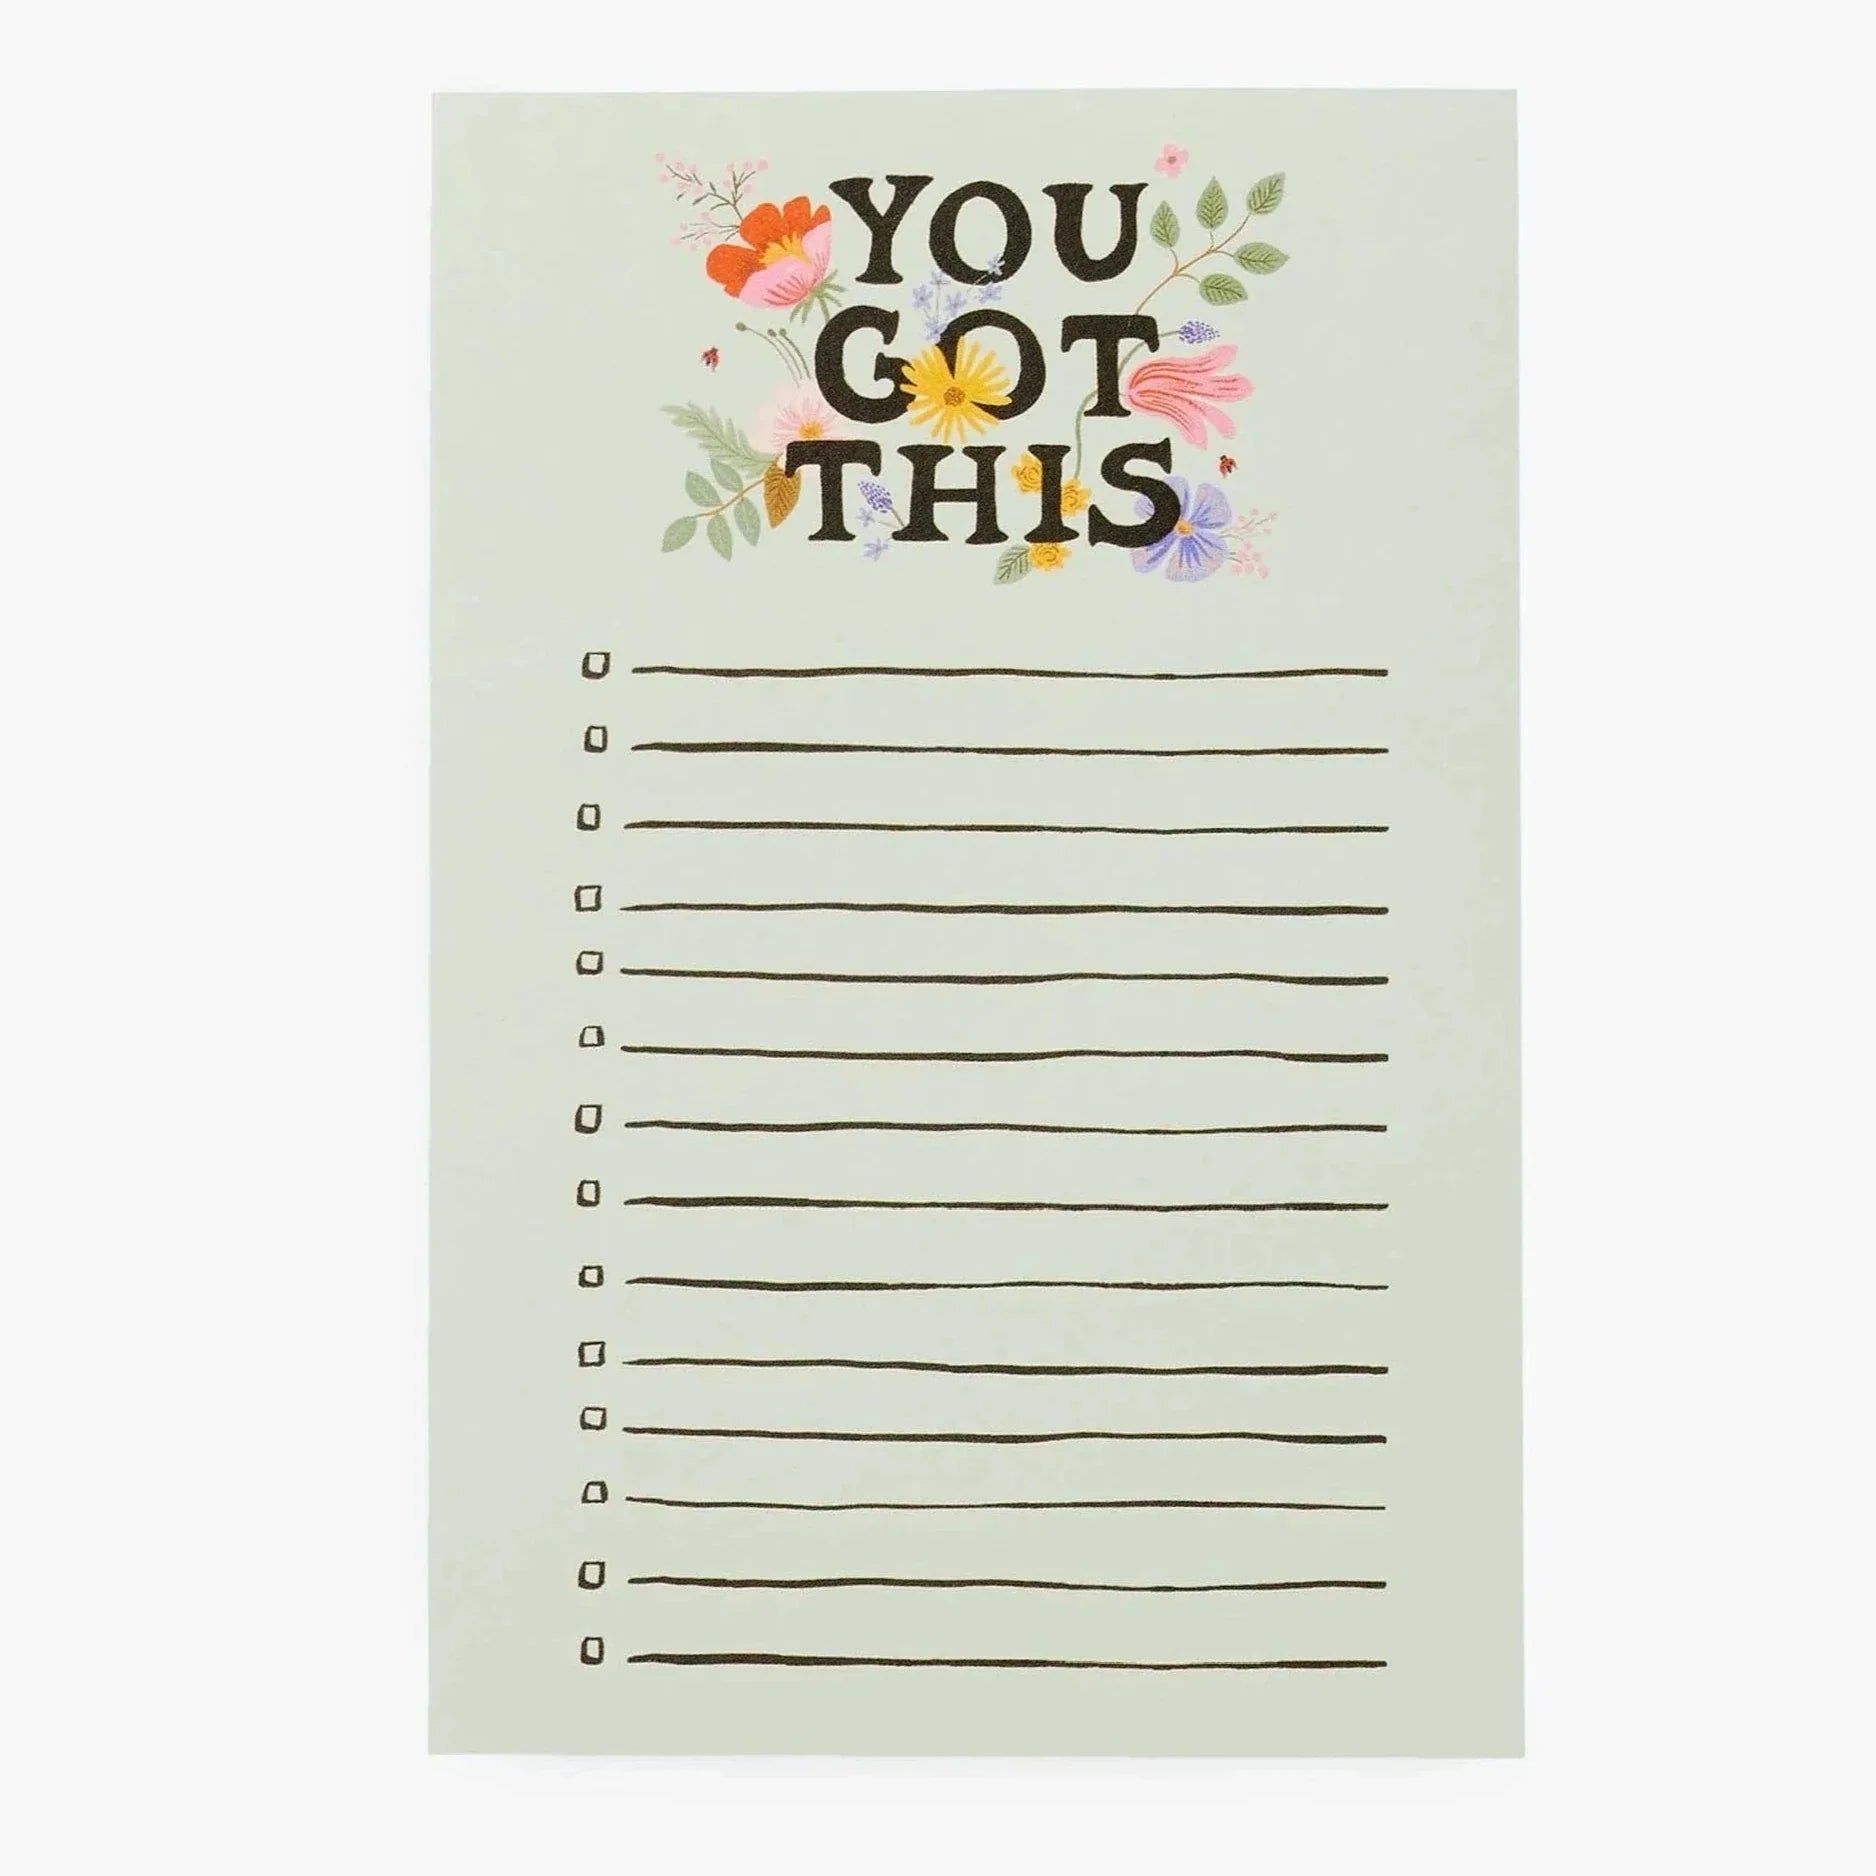 green notepad with small brown lines with a box at the start of the line. "You Got This" printed at the top in black with flowers throughout the wording